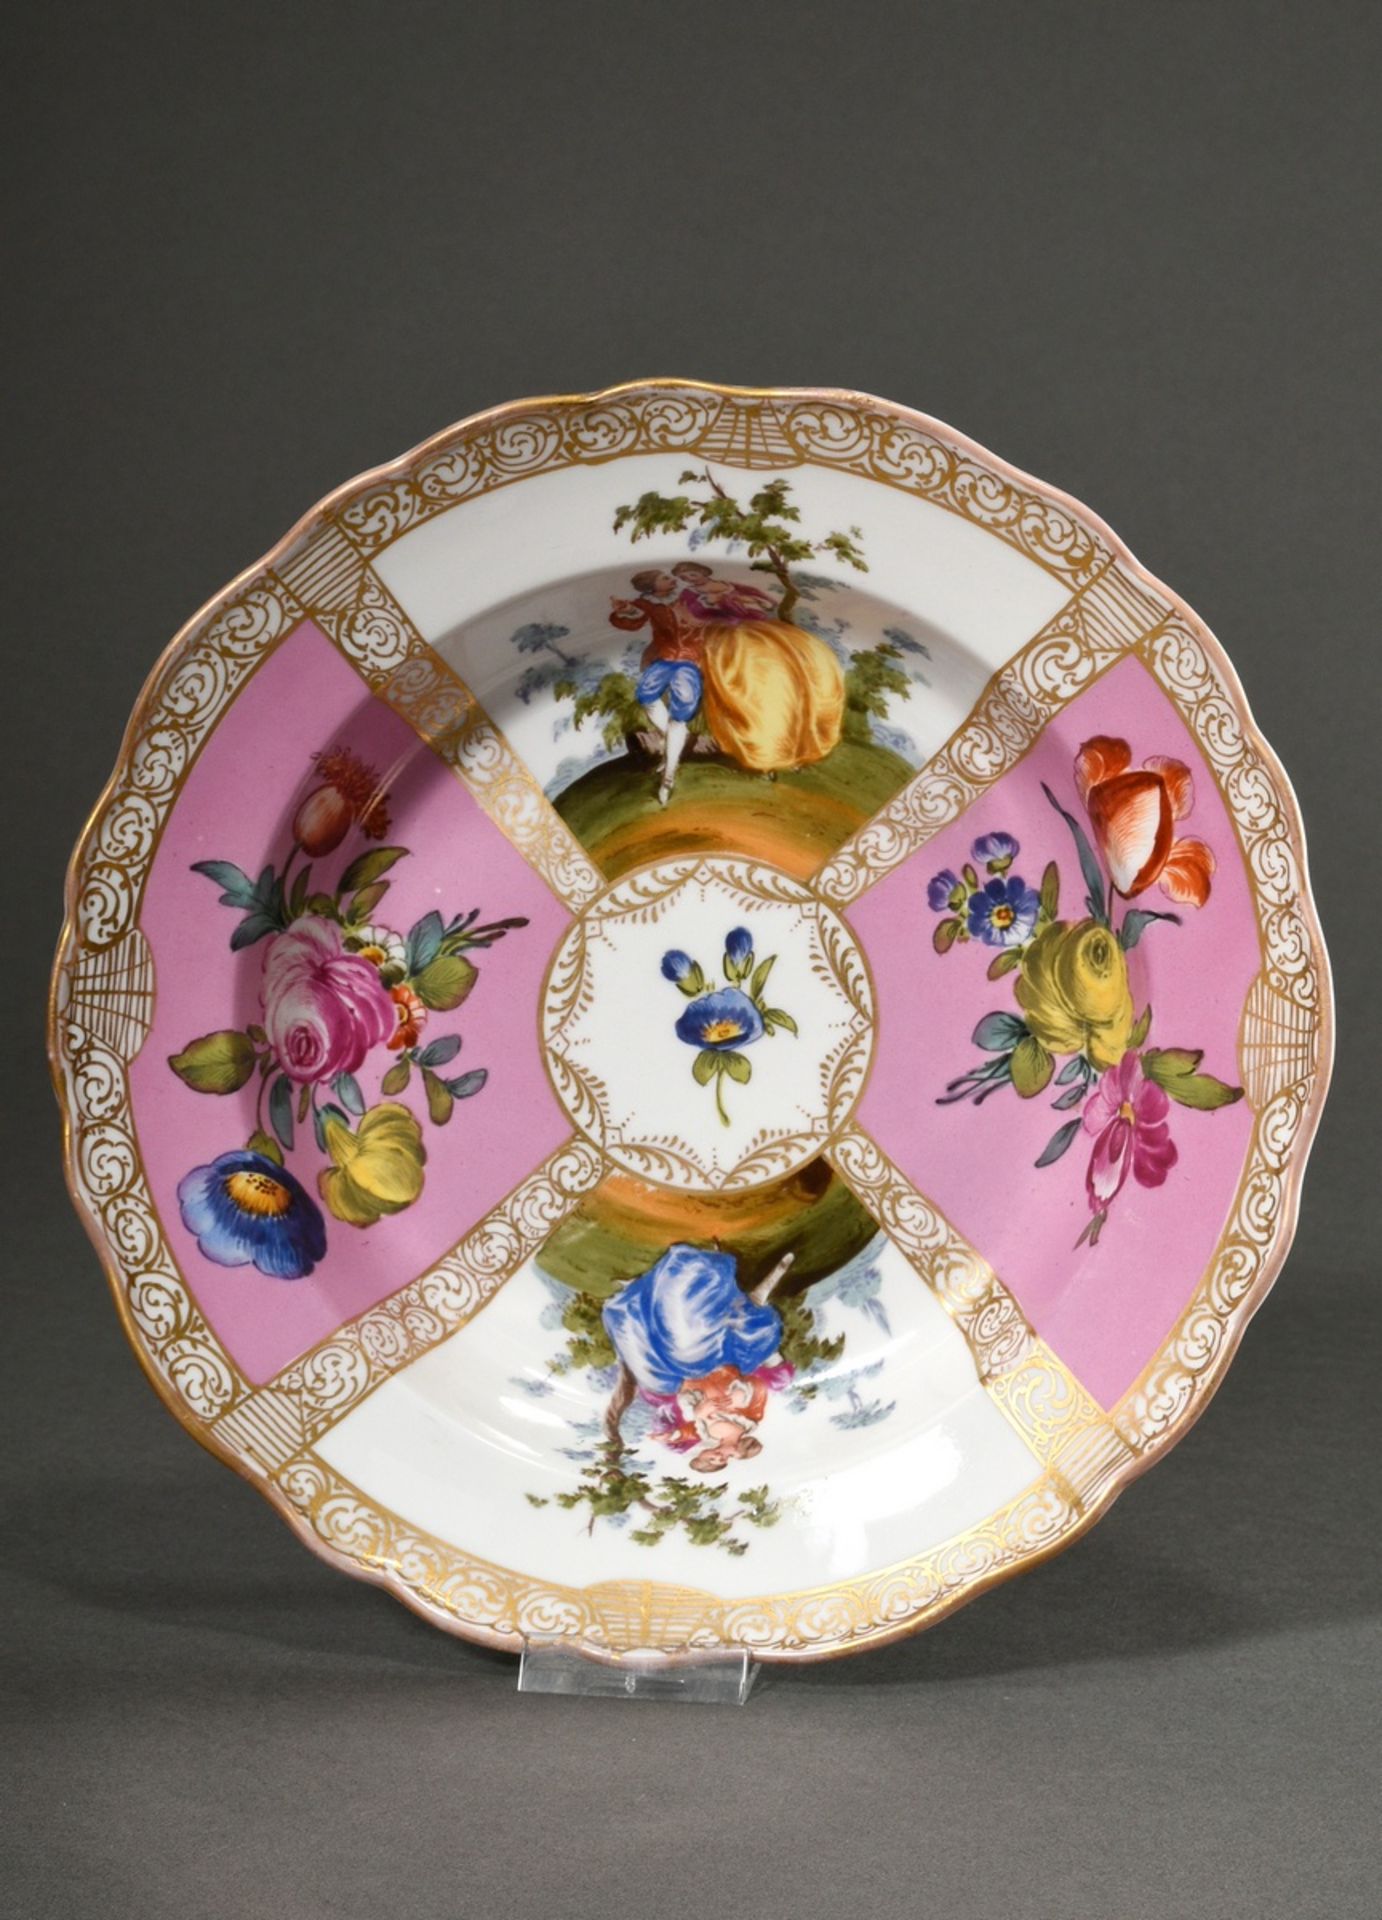 Meissen plate "Lovers" with watteau painting on rosé fond, probably house painting, Ø 23cm, 19th c. - Image 4 of 6